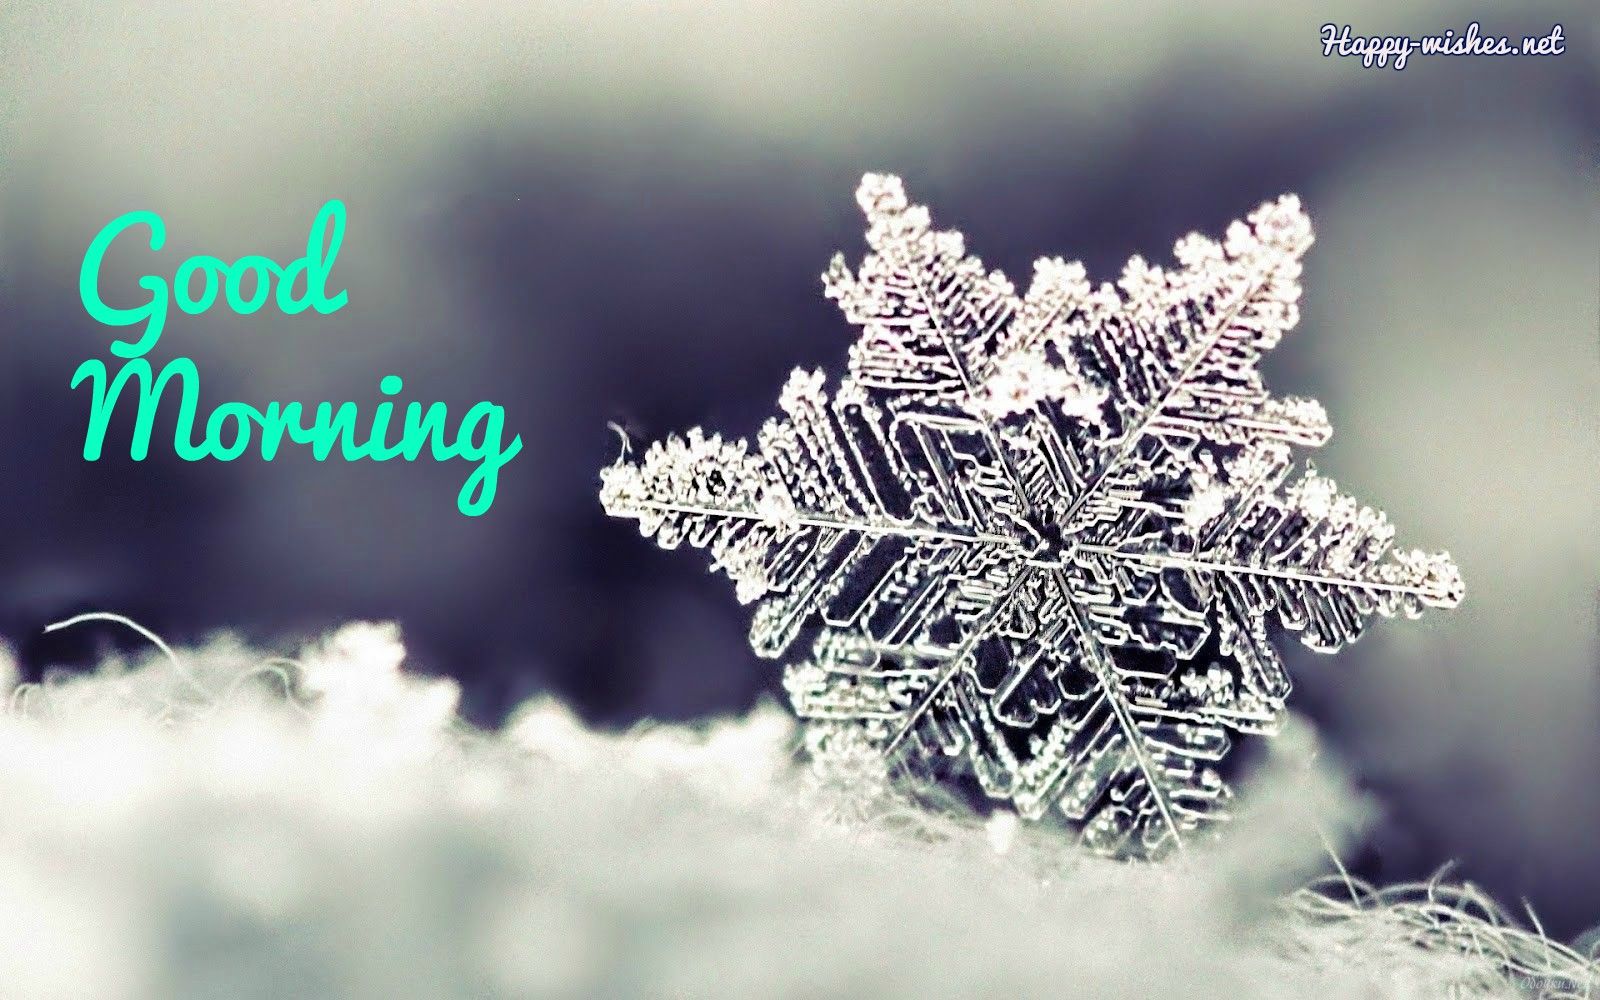 Winter Good Morning Wishes Quotes & Image. Winter wallpaper, Nature background iphone, Christmas wallpaper